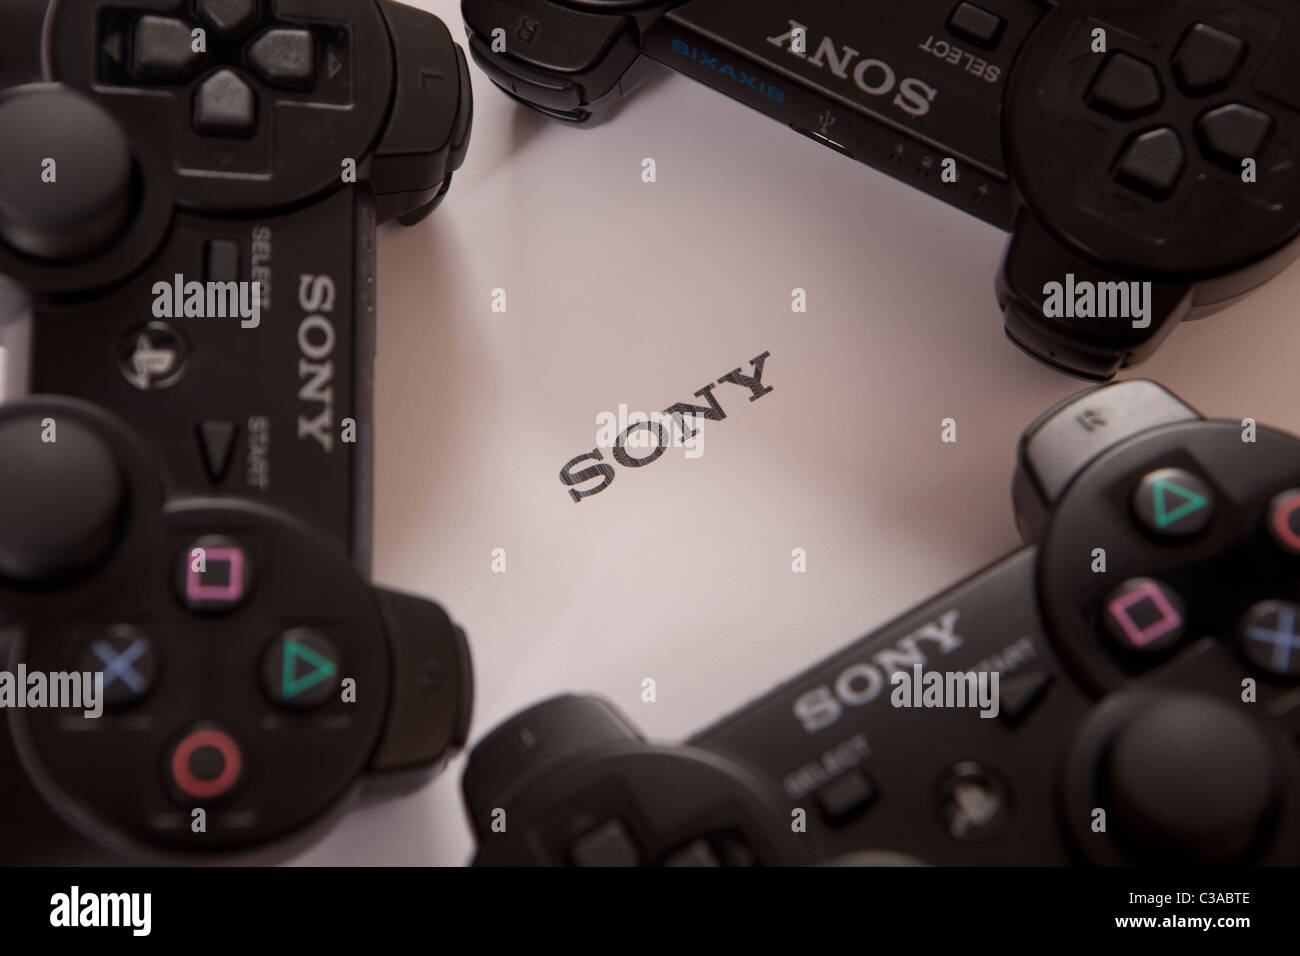 Illustrative image of the Sony Playstation 3 controller. Stock Photo